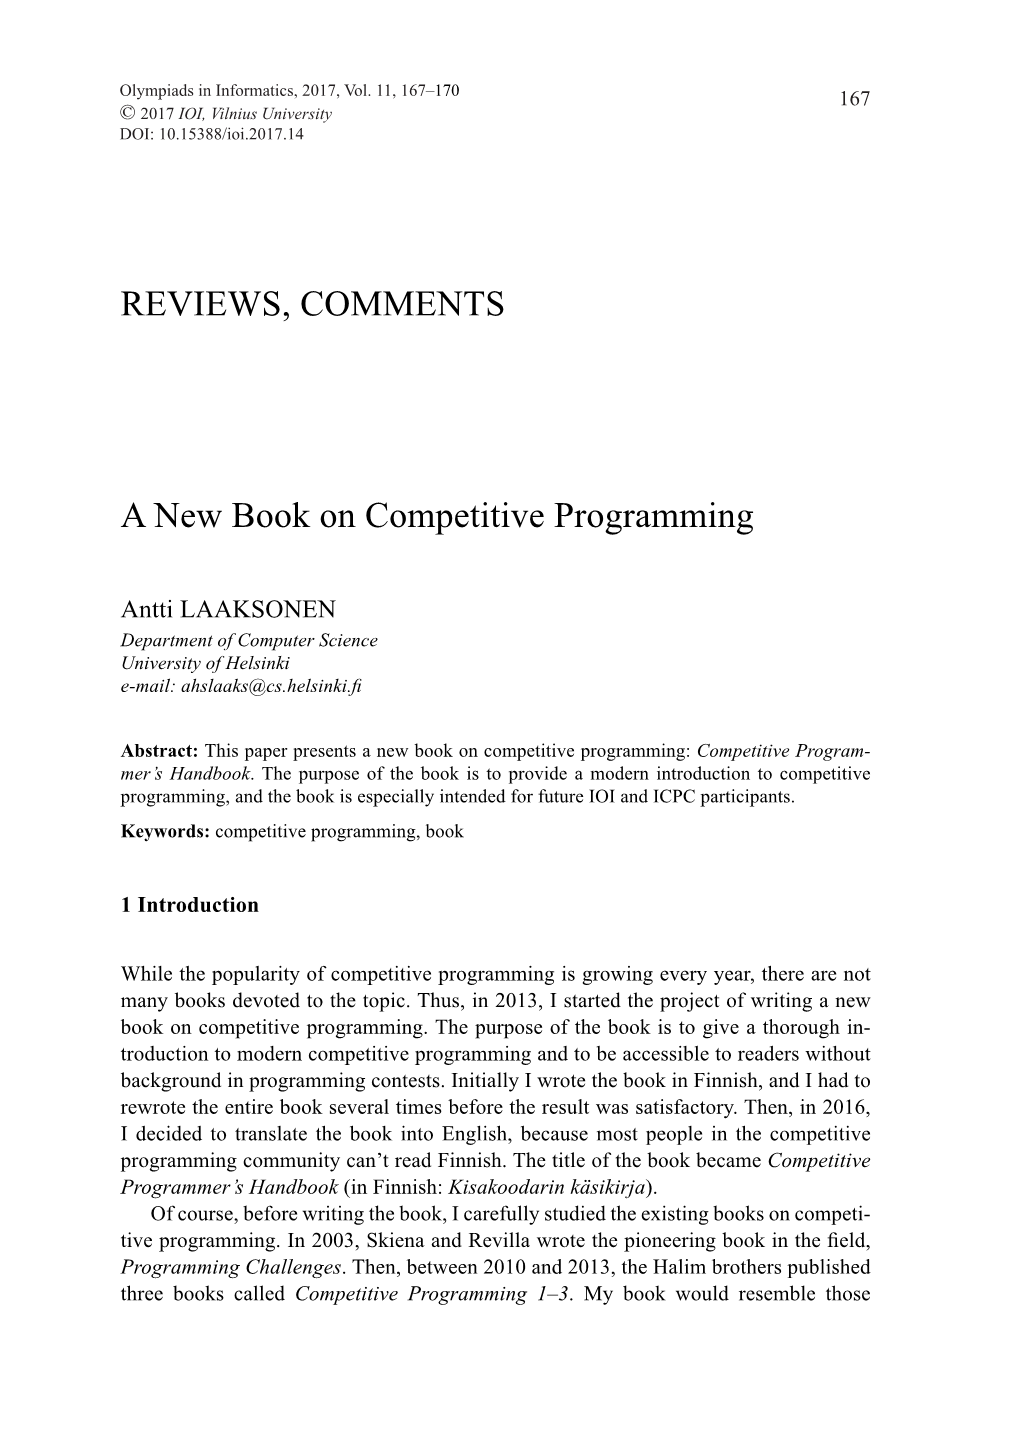 A New Book on Competitive Programming (167-170)